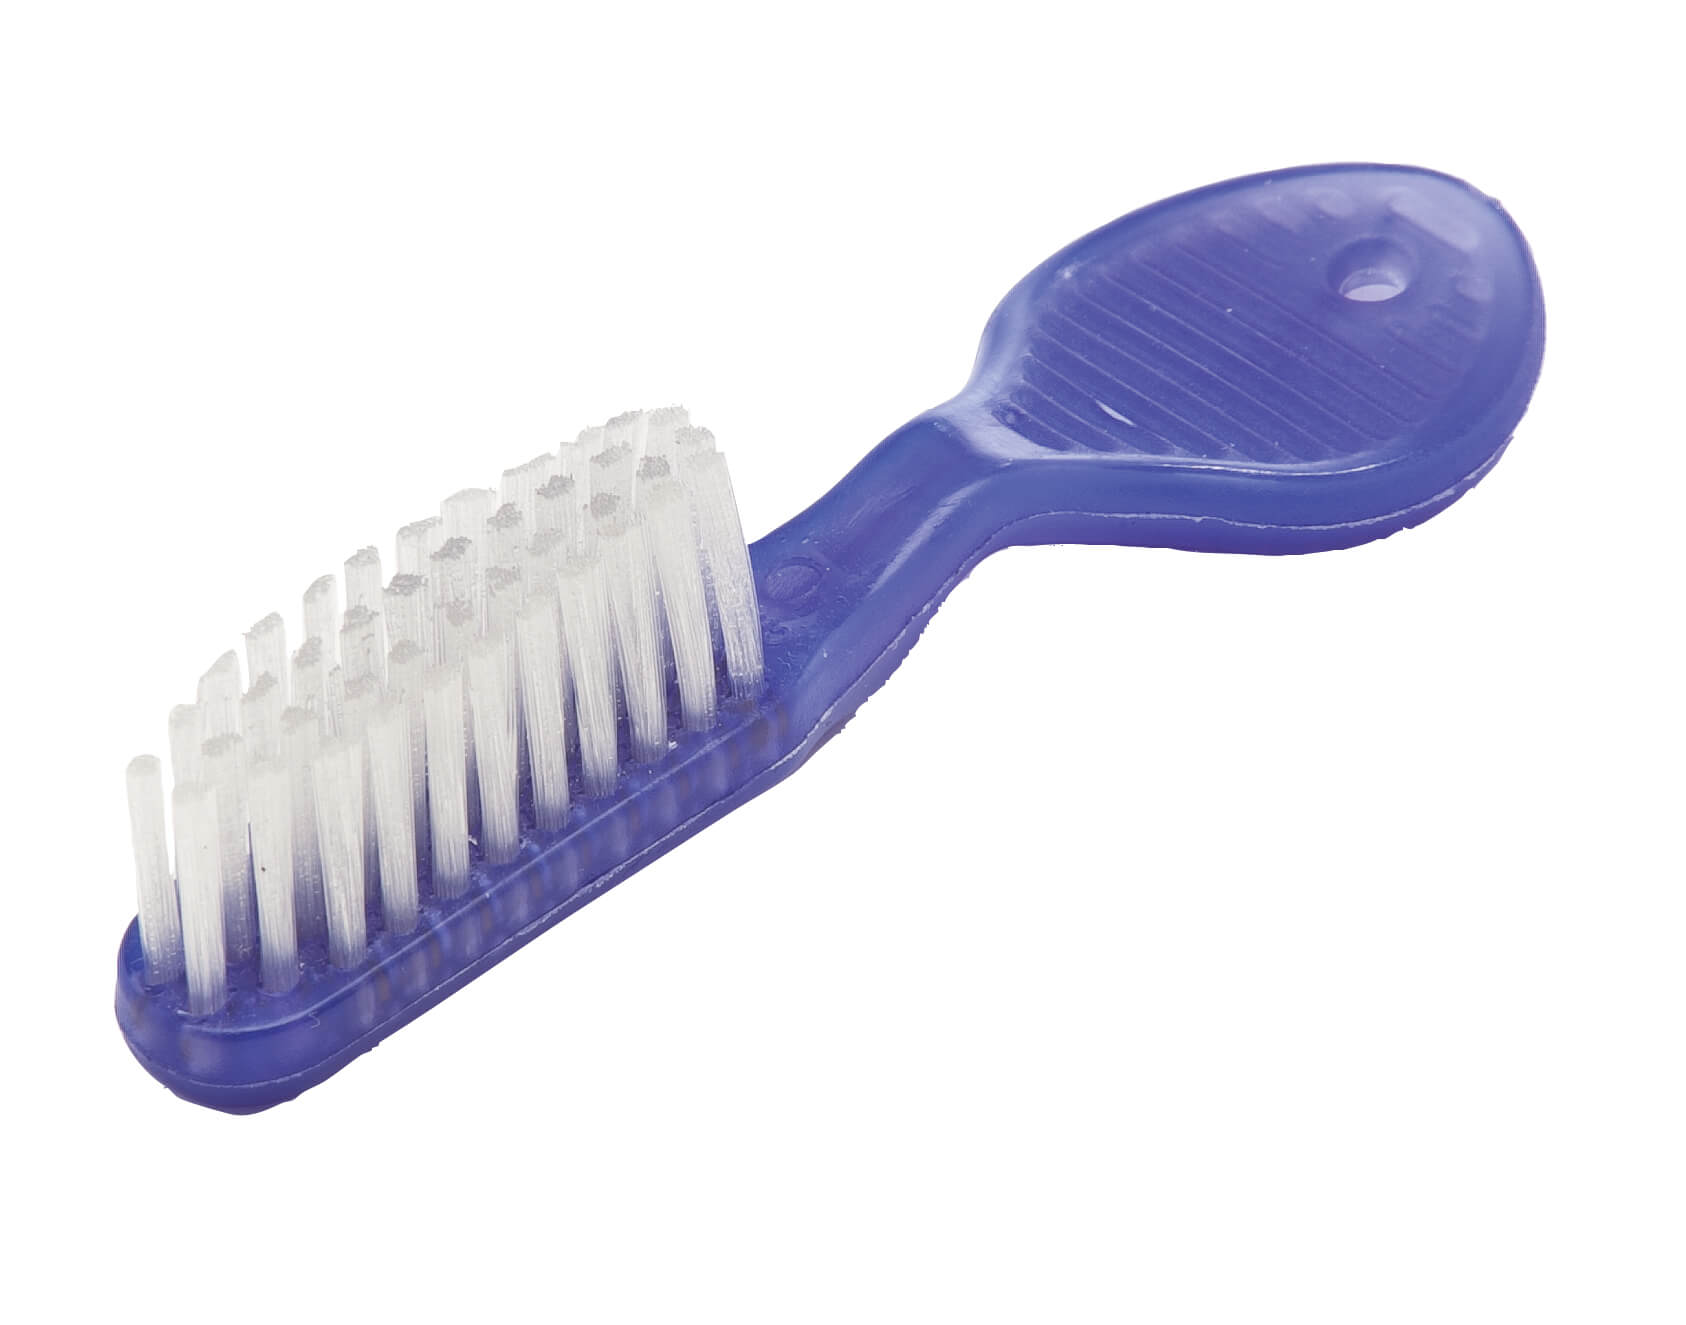 Pre-Pasted Thumbprint Toothbrush